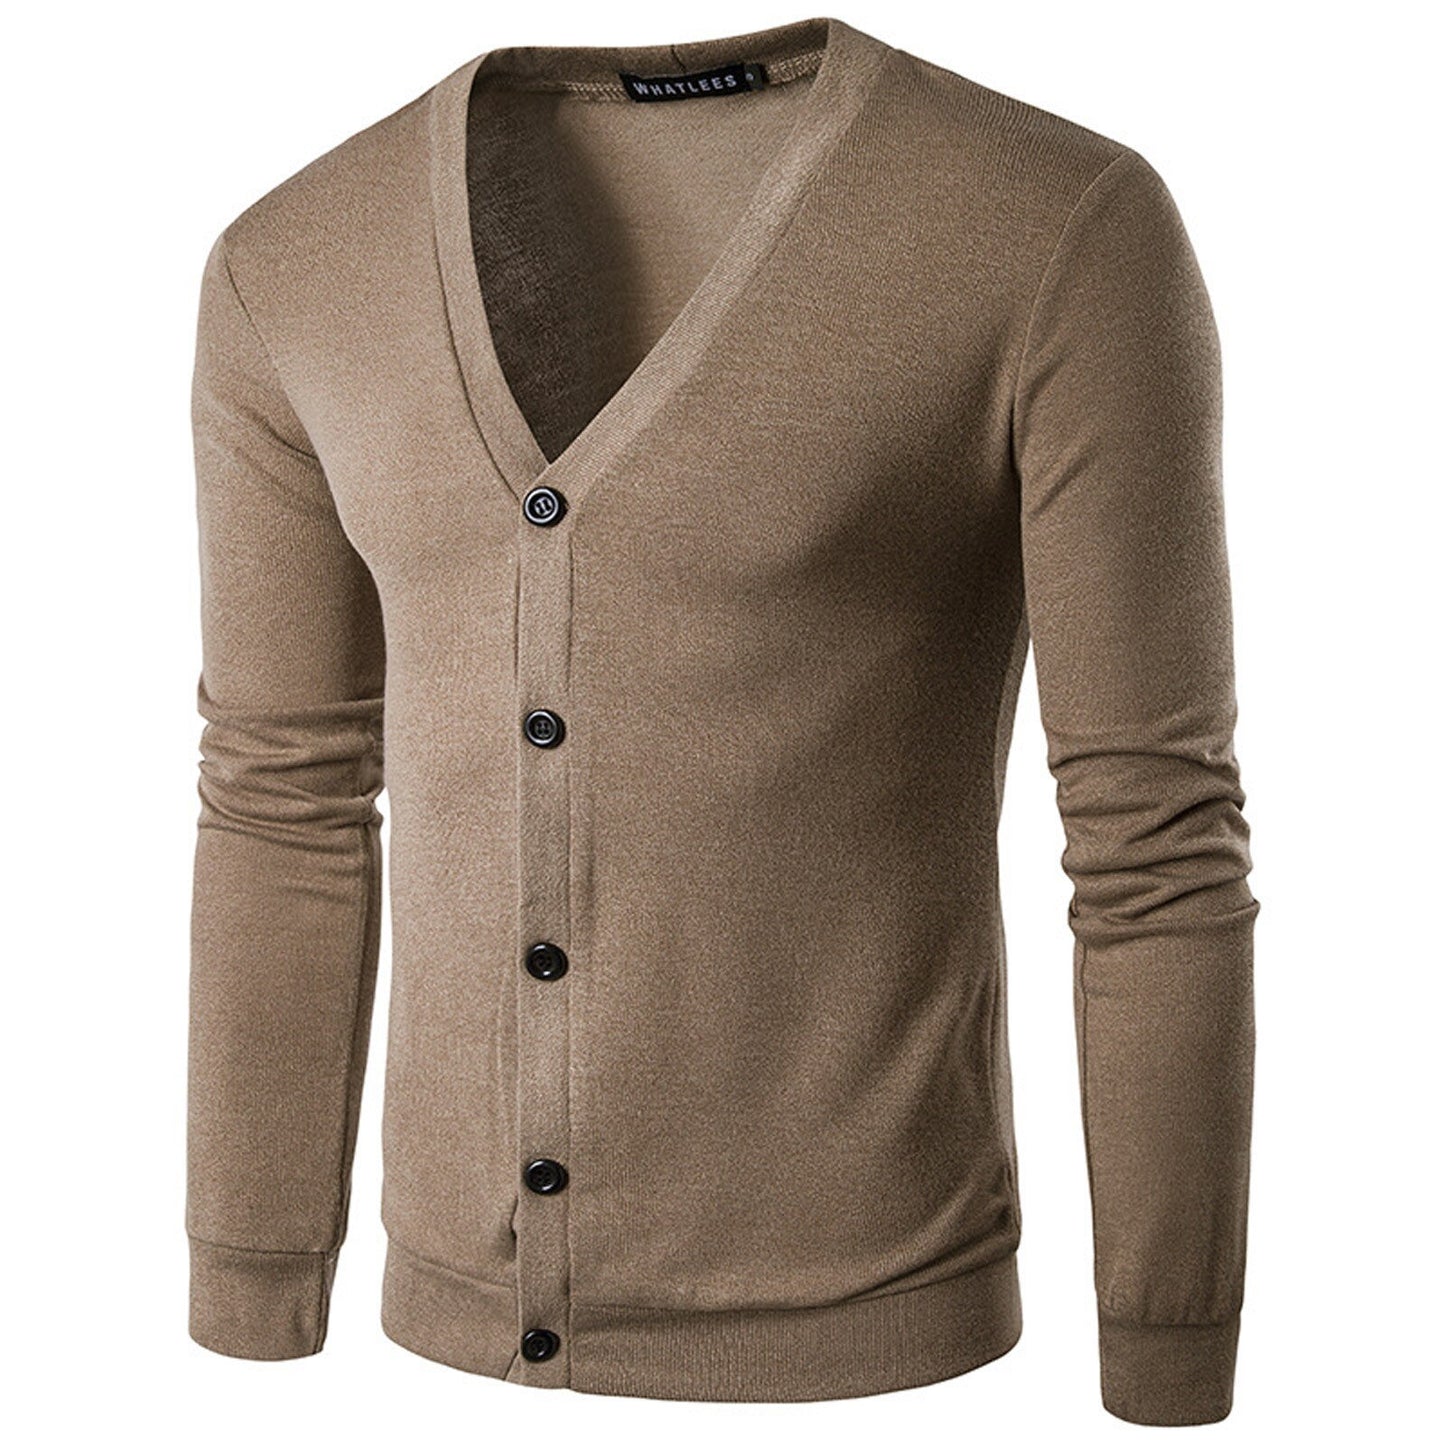 Men's Youth Fashion Solid Color V-Neck Long Sleeve Slim Fit Sweater